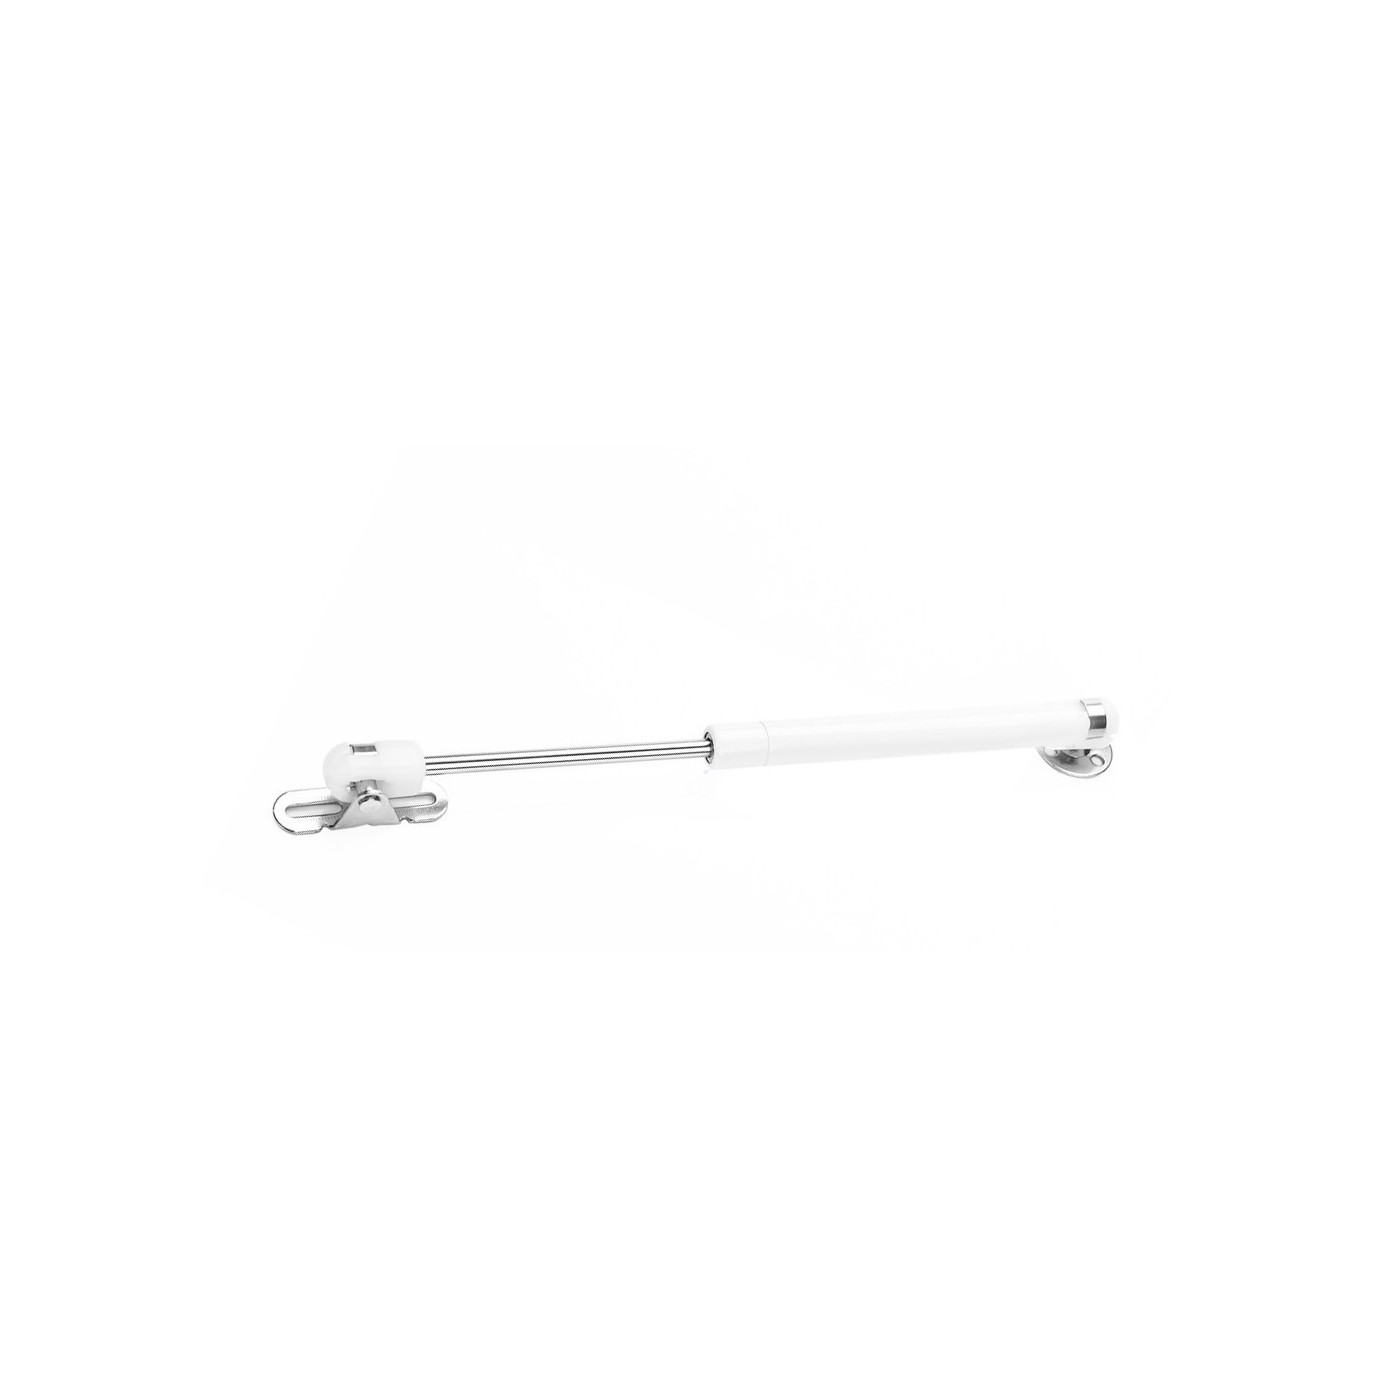 Universal gas spring with brackets (50N/5kg, 244 mm, white)